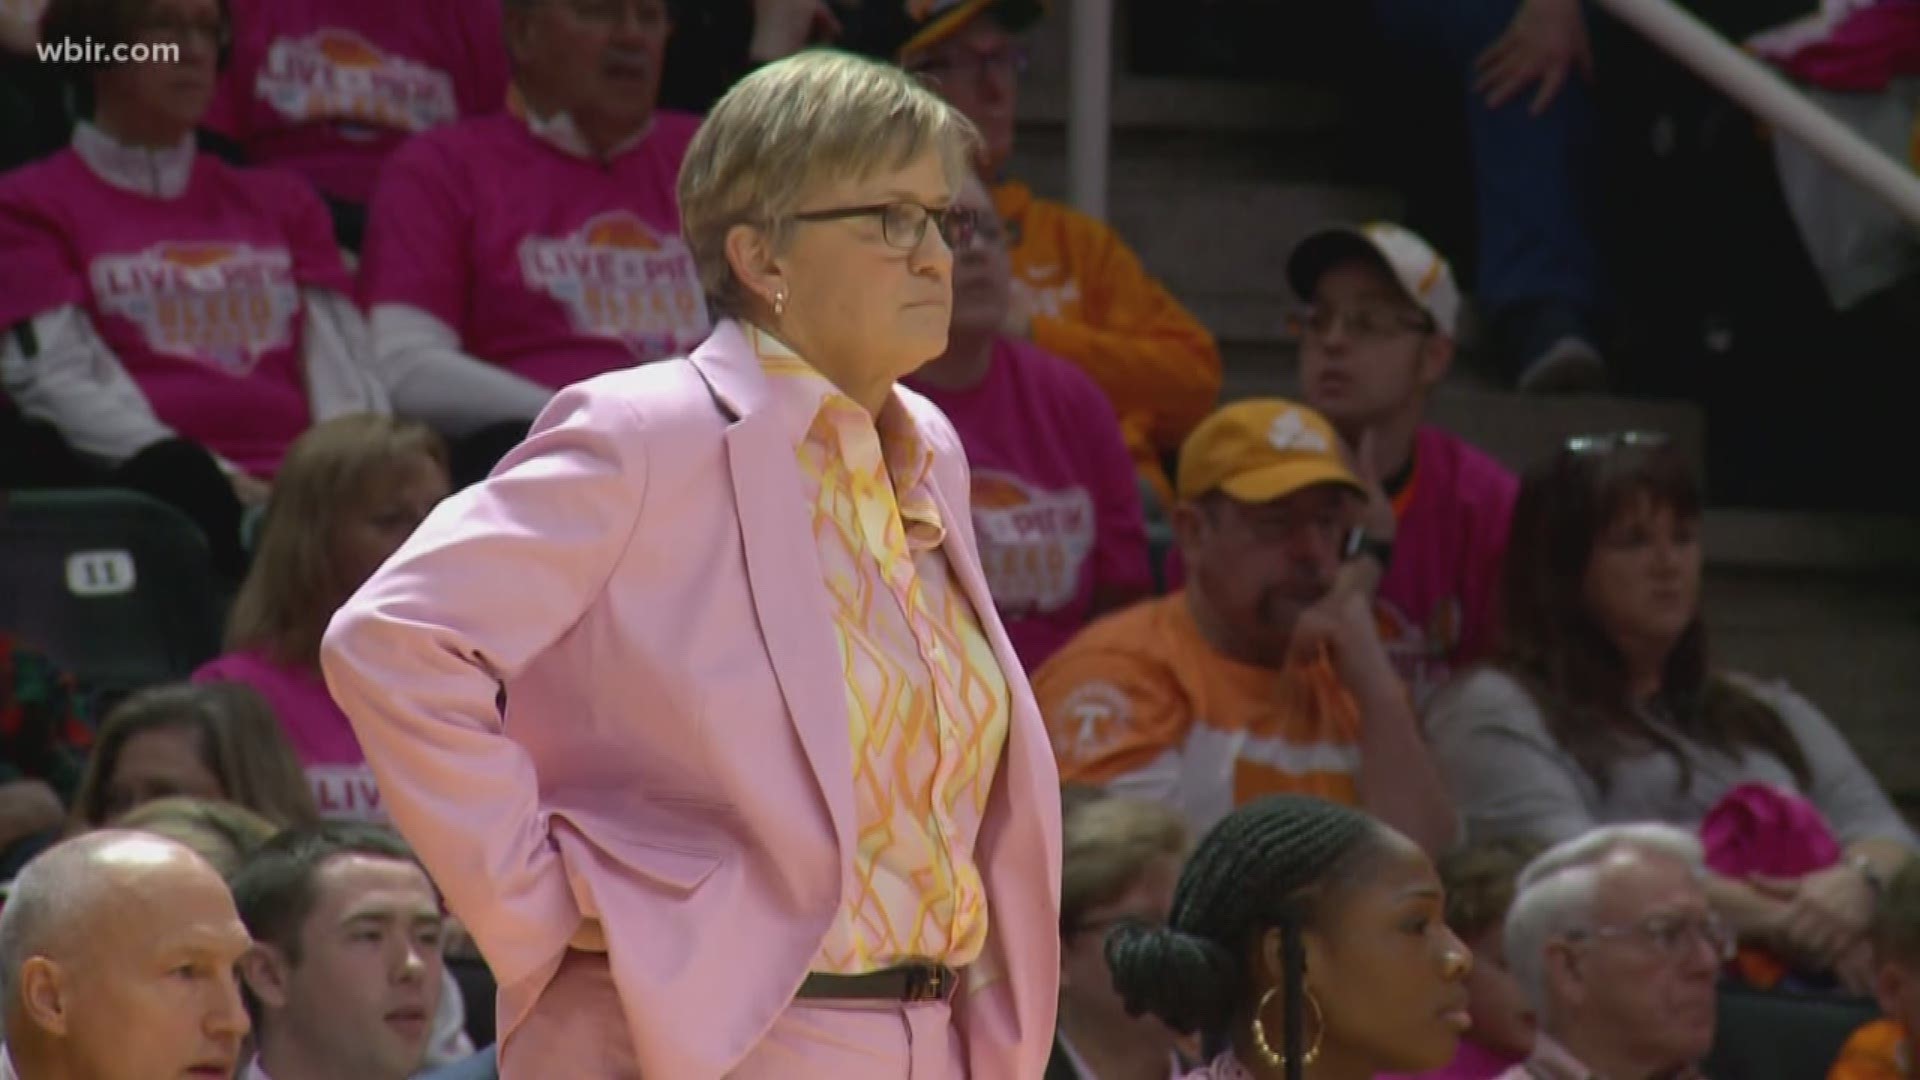 It was the Live Pink, Bleed Orange game to raise awareness for breast cancer and breast cancer research.